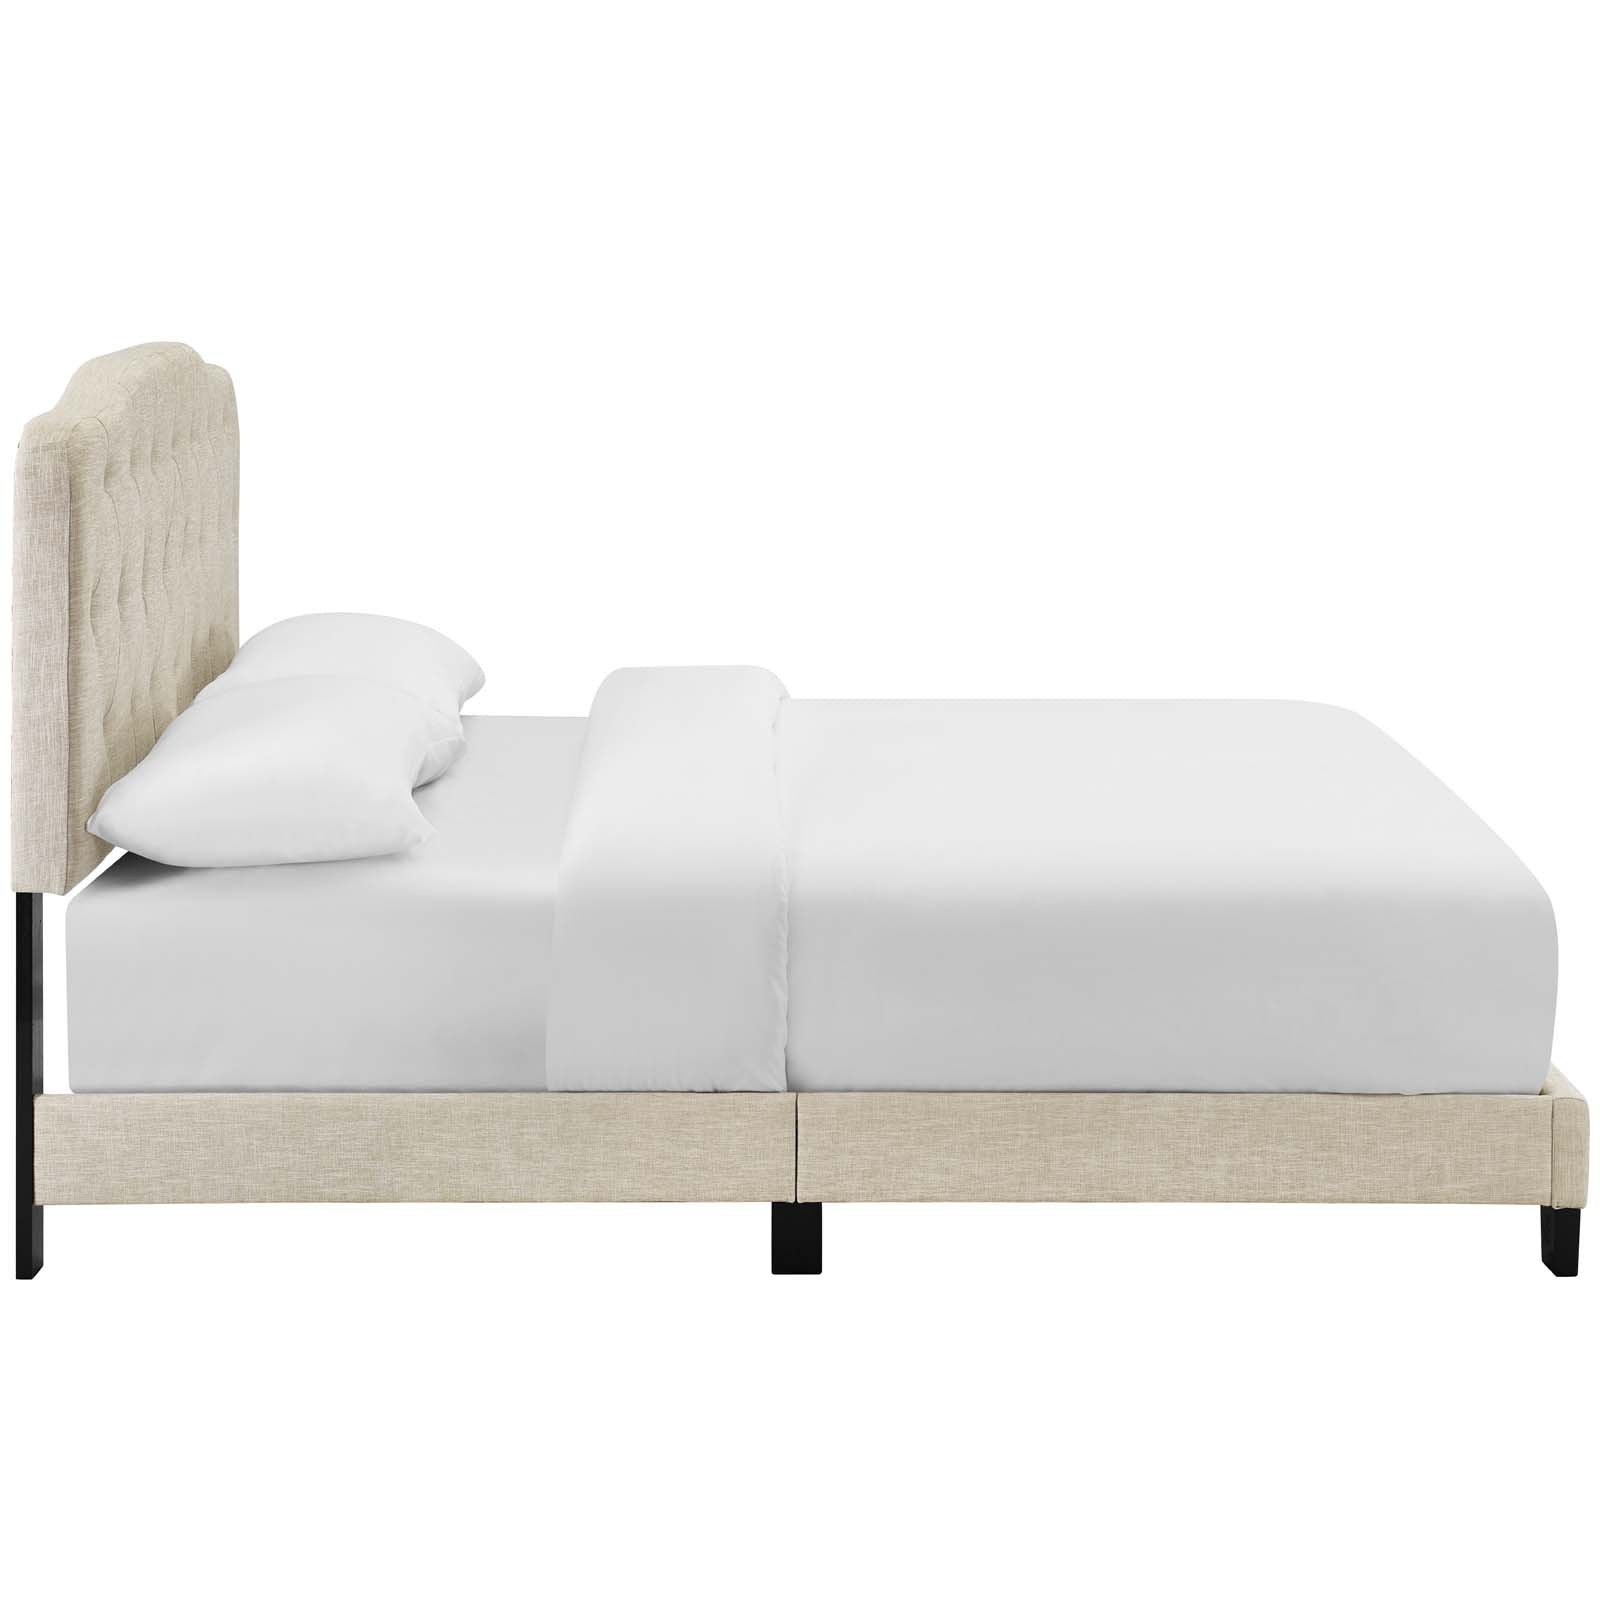 Amelia Upholstered Fabric Bed - East Shore Modern Home Furnishings